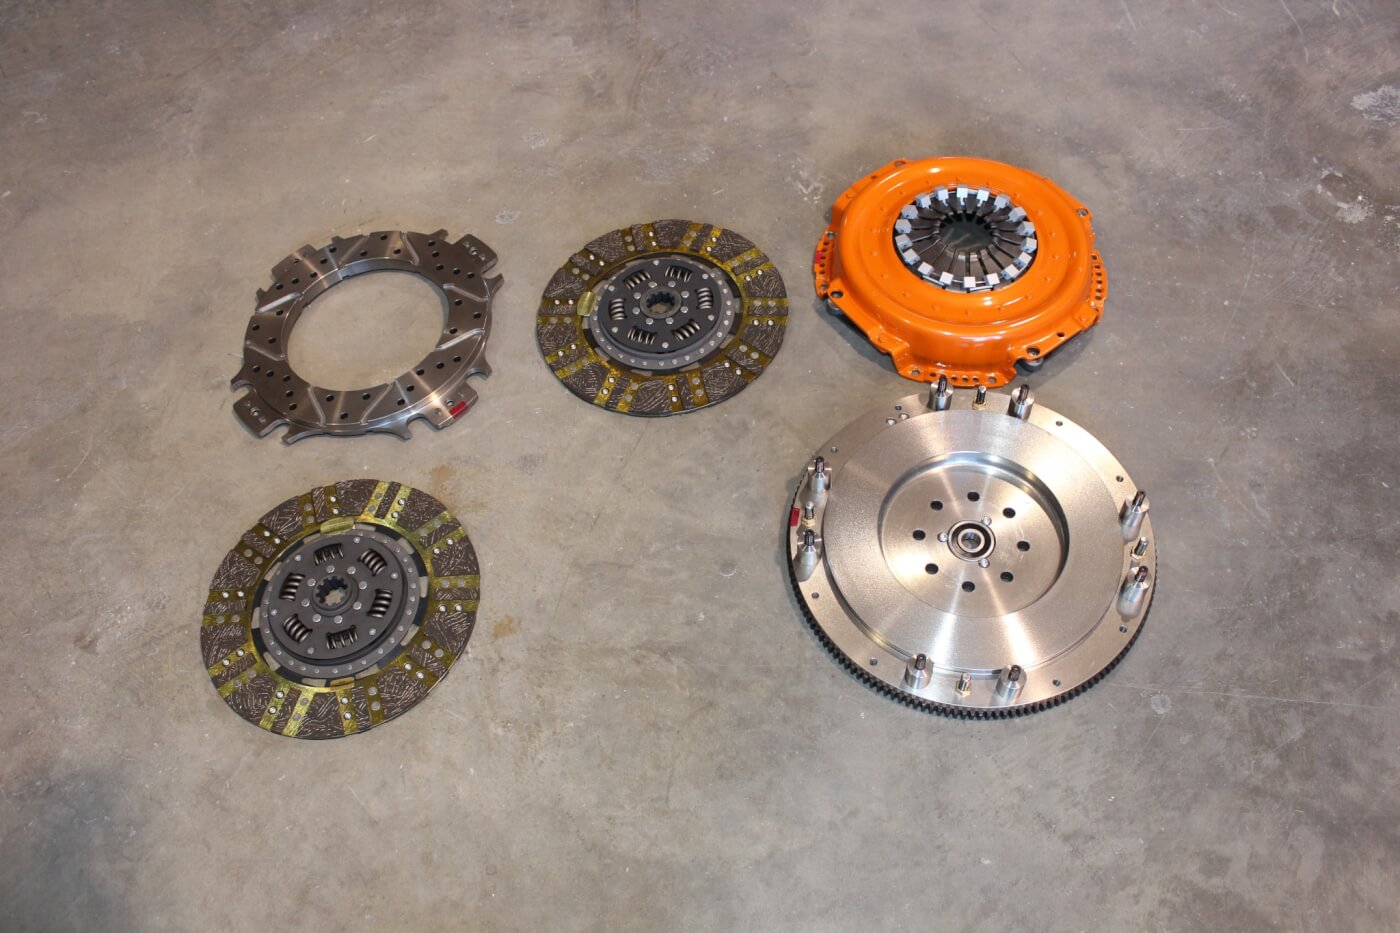 4. The multi-disc Diesel Twin clutch from Centerforce is a pretty serious unit that’s capable of handling up to 1,700 lb-ft of torque. The system consists of a new one-piece flywheel that replaces the problematic stock dual-mass flywheel, a pair of clutch discs, floater, pressure plate, and a new slave and clutch master cylinder. Multi-disc clutches are known for tremendous holding power, but they also have a reputation for being noisy, having rough engagement, and needing a large amount of pedal effort. Centerforce has gone to great lengths to overcome all the negative characteristics of a traditional multi-disc clutch in order to make a clutch with excellent holding power that acts just like an ordinary clutch, making it an excellent choice for a hopped-up daily driver or one that spends most of its time hauling heavy stuff.